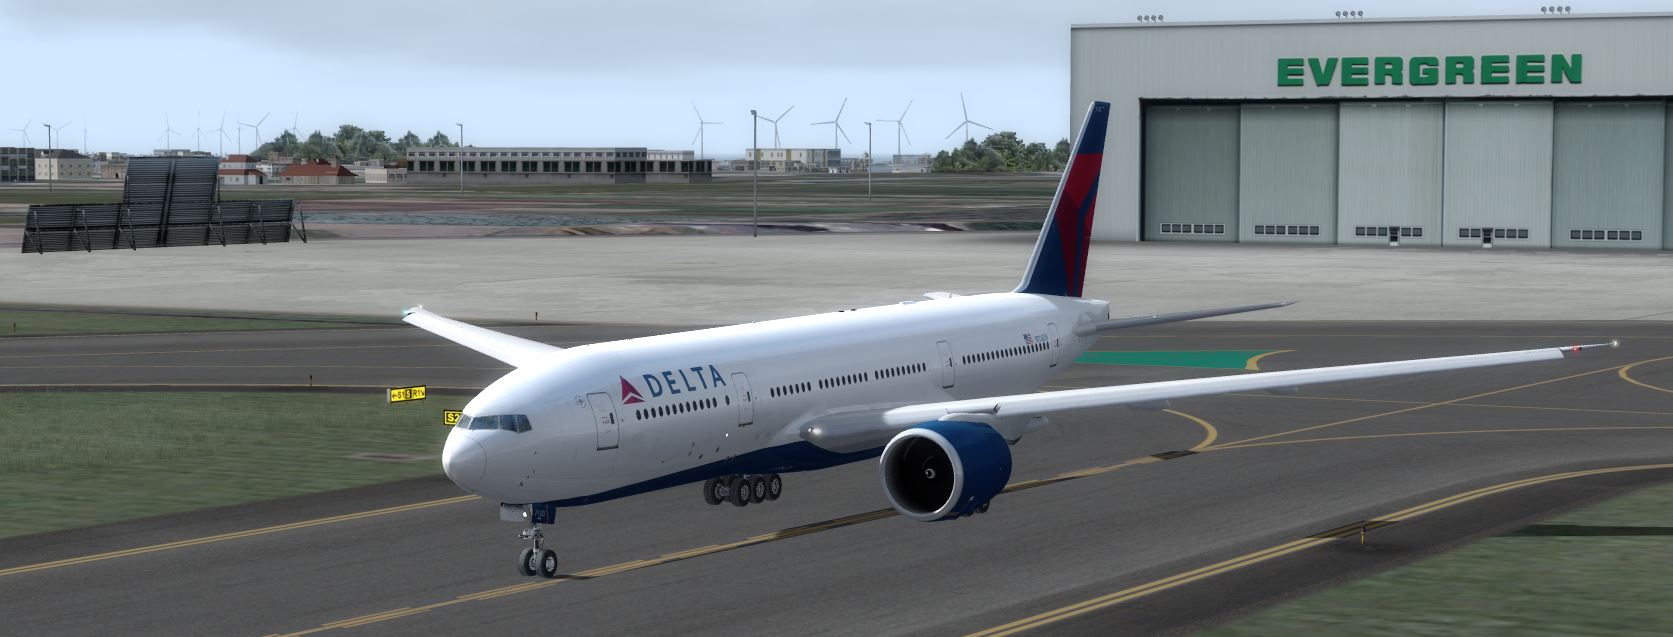 B777-200 Delta Airlines Standard Livery-5044 